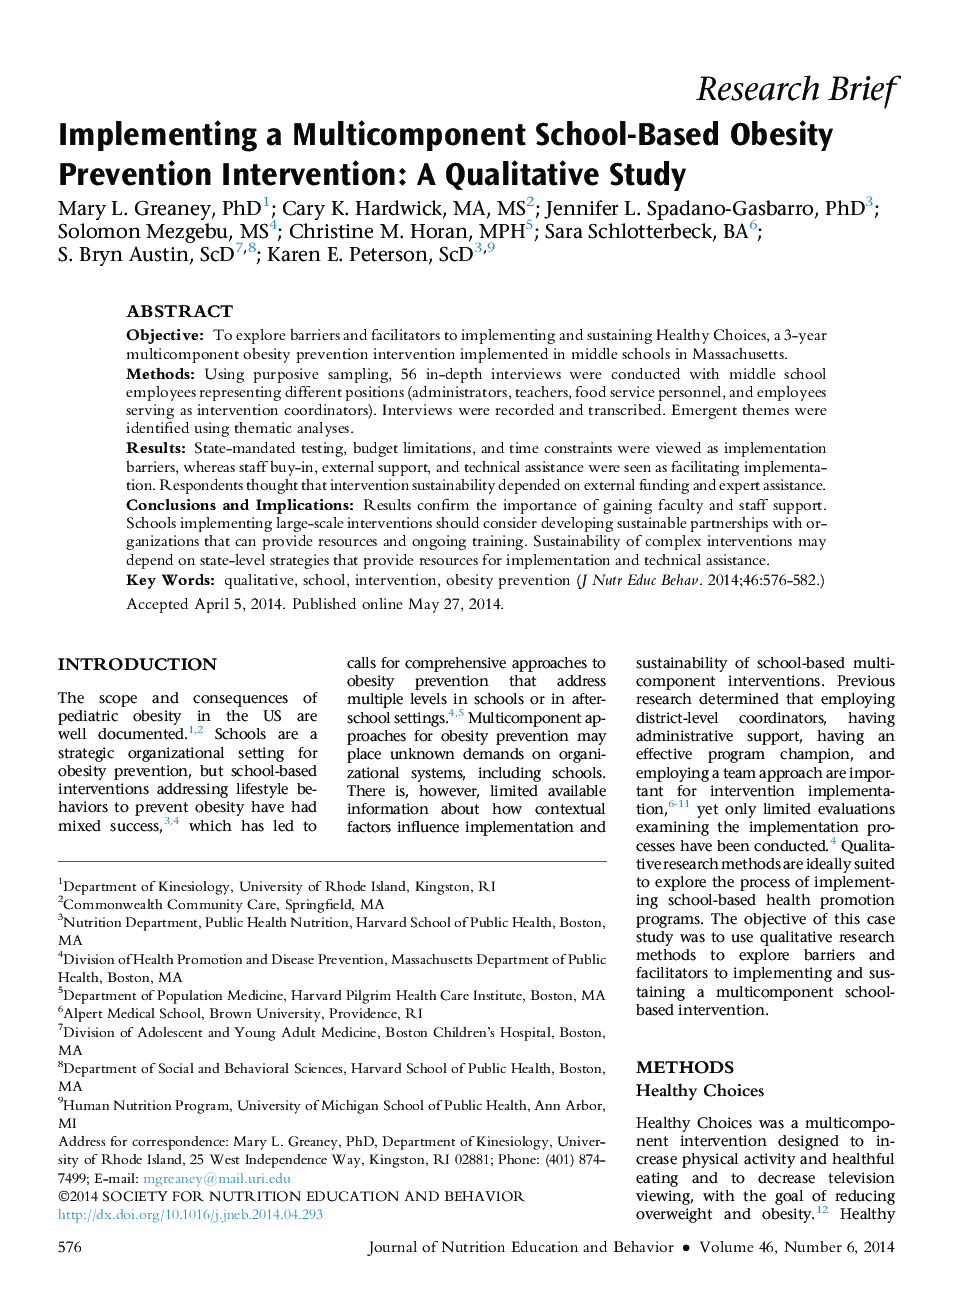 Implementing a Multicomponent School-Based Obesity Prevention Intervention: A Qualitative Study